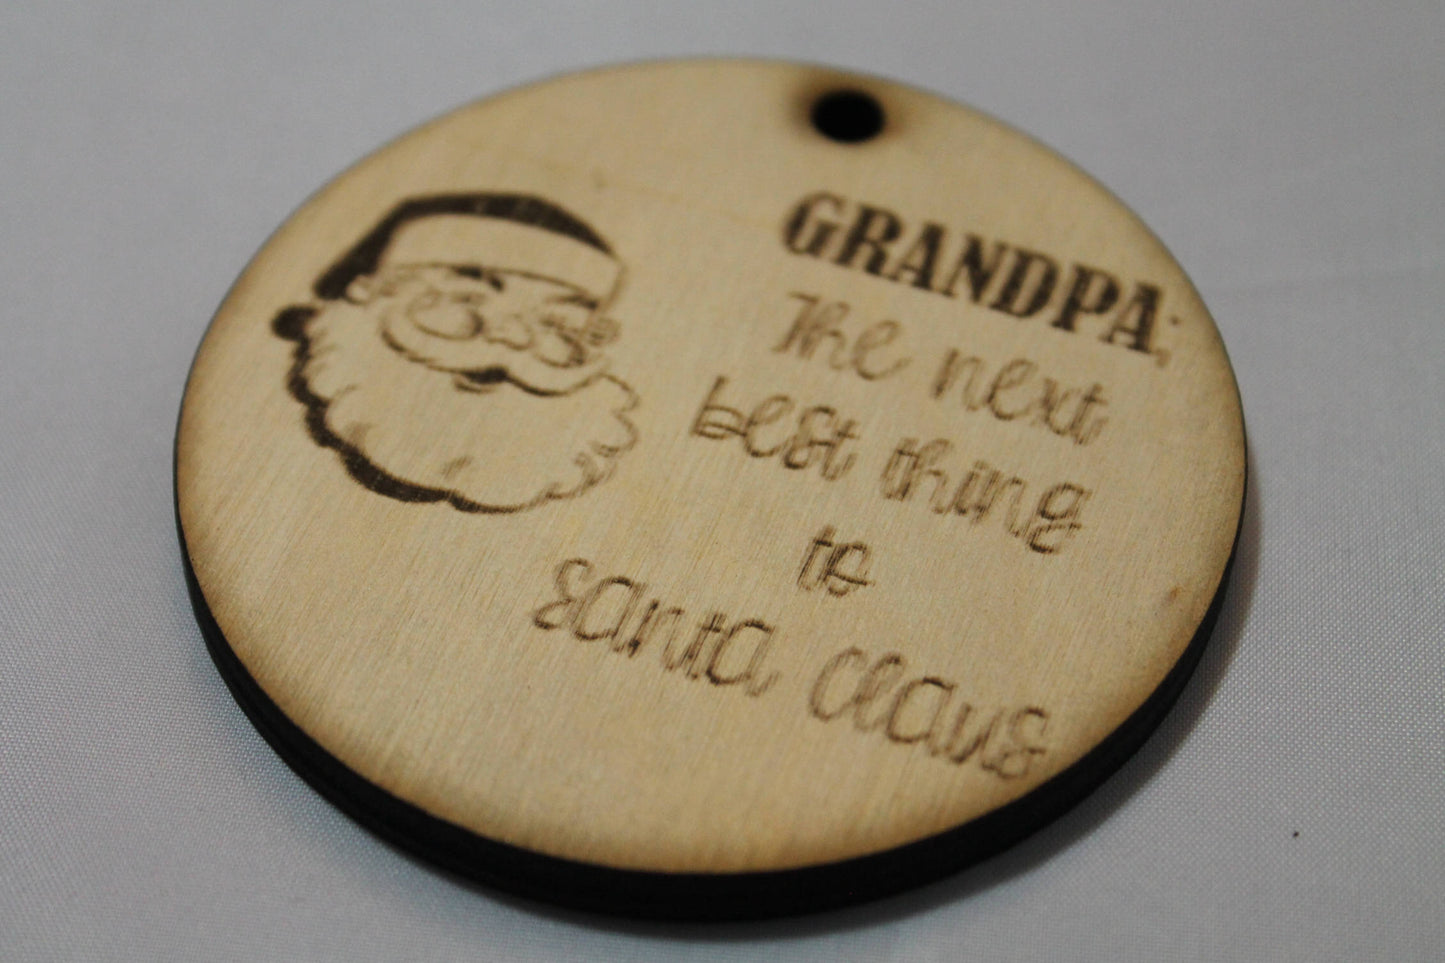 Grandpa the next best thing to Santa Claus, Grandpa Gift, Christmas Ornament, Laser Engraved, Wood Cut Out, Footstepsinthepast